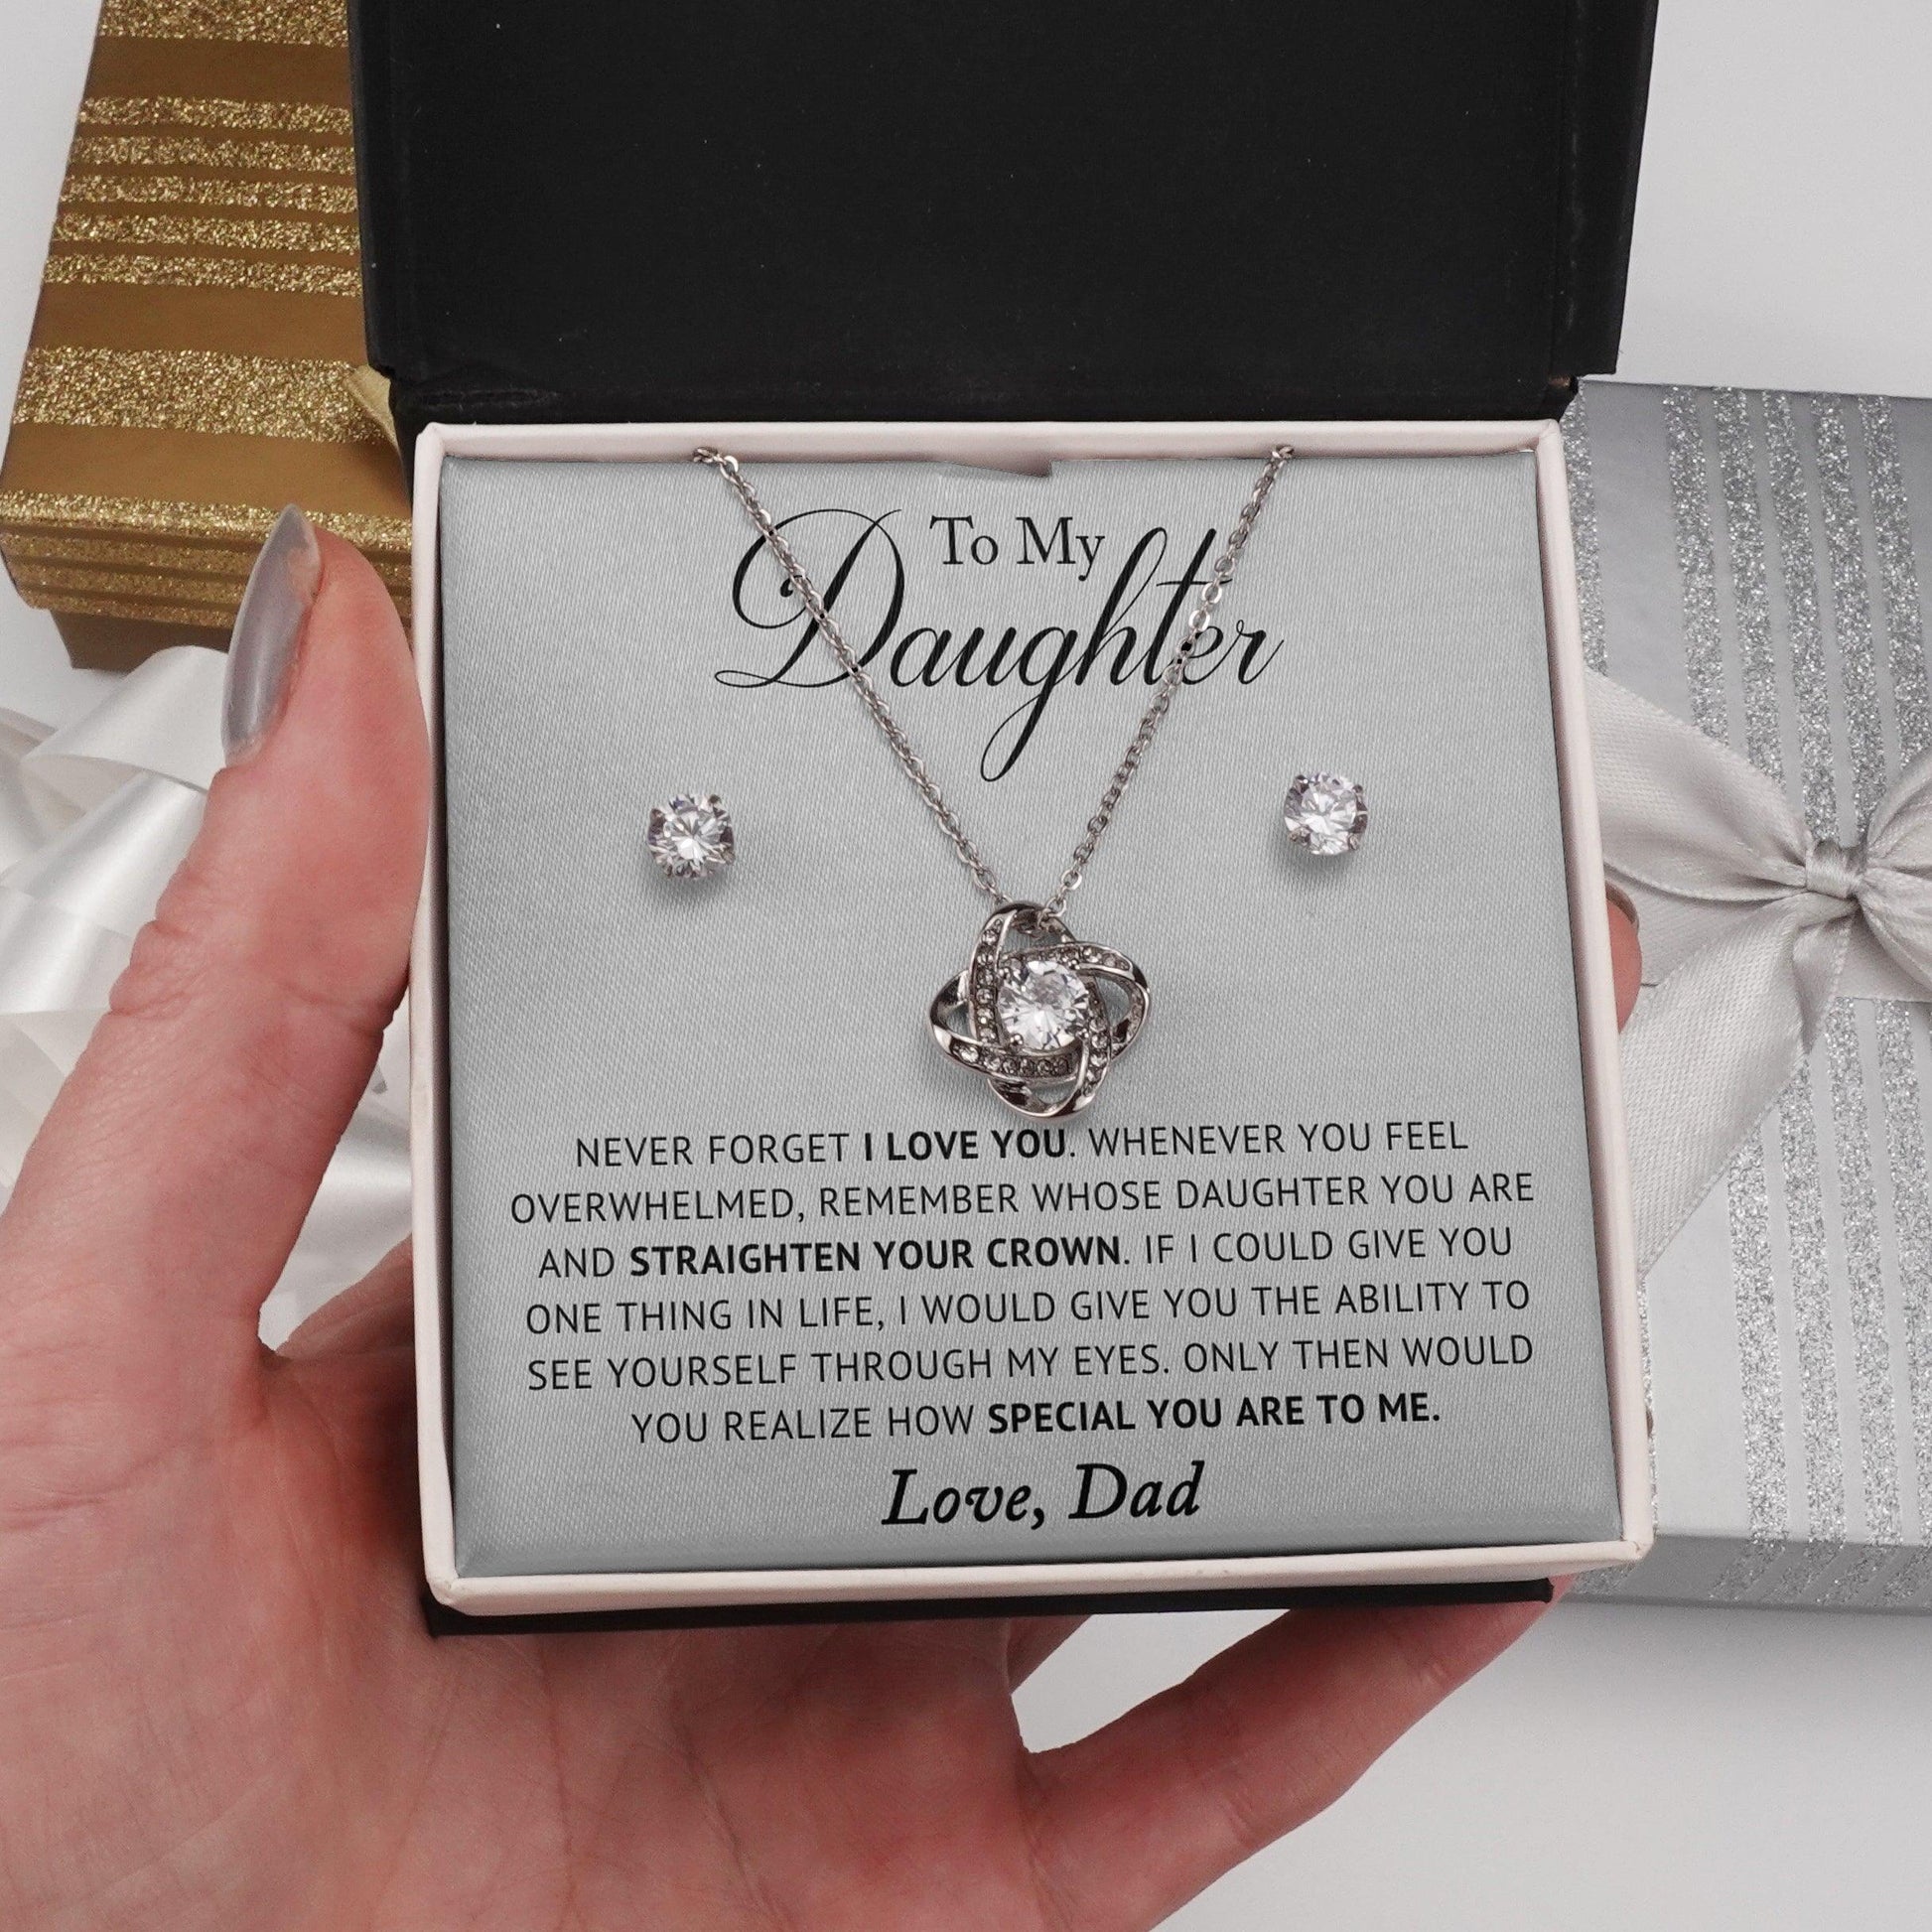 Jewelry gifts Daughter - Never Forget - LK Gift Set - Belesmé - Memorable Jewelry Gifts